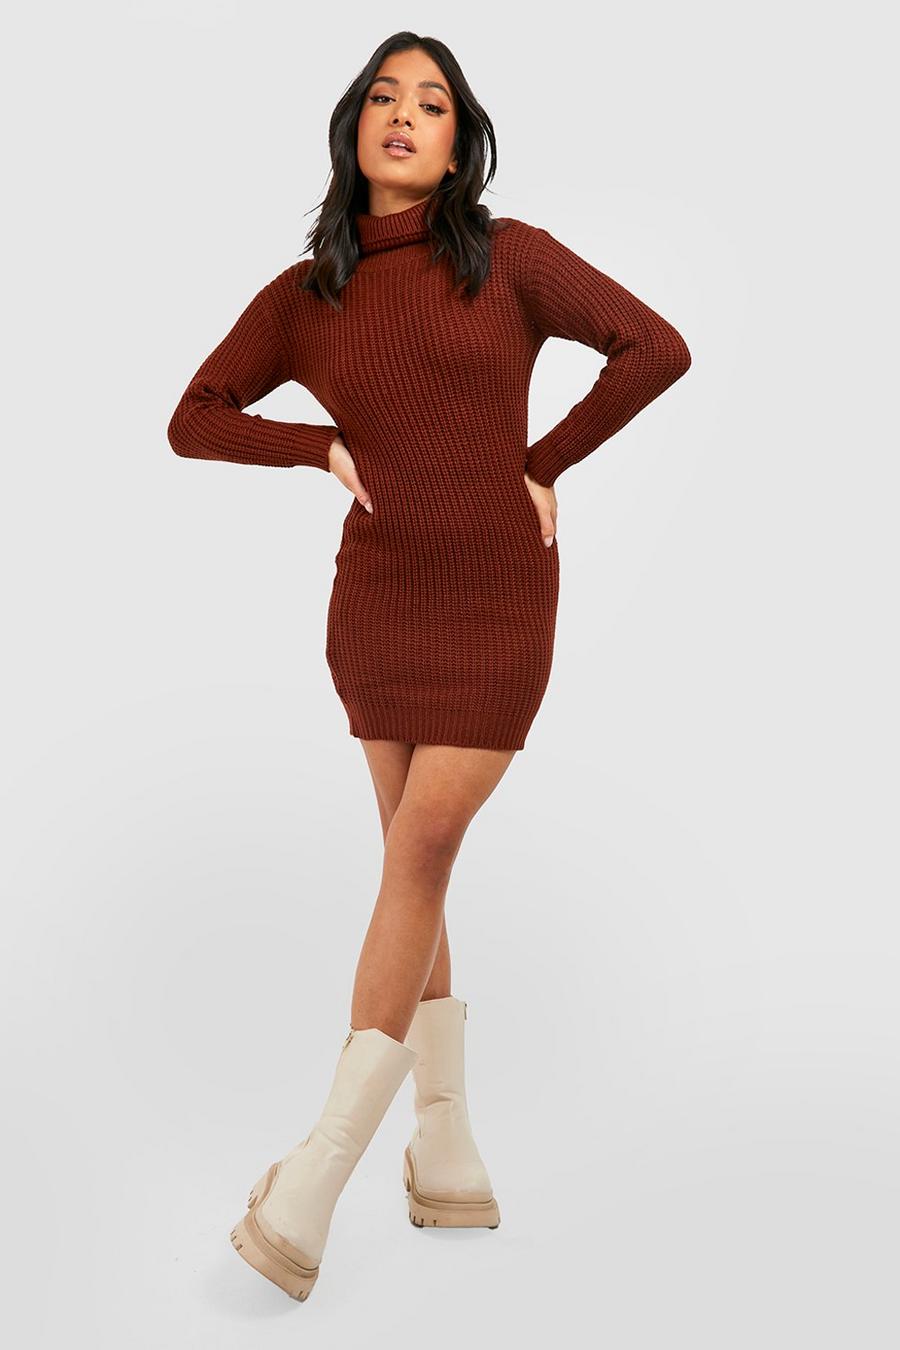 Mahogany brown Recycled Petite Turtleneck Sweater Dress